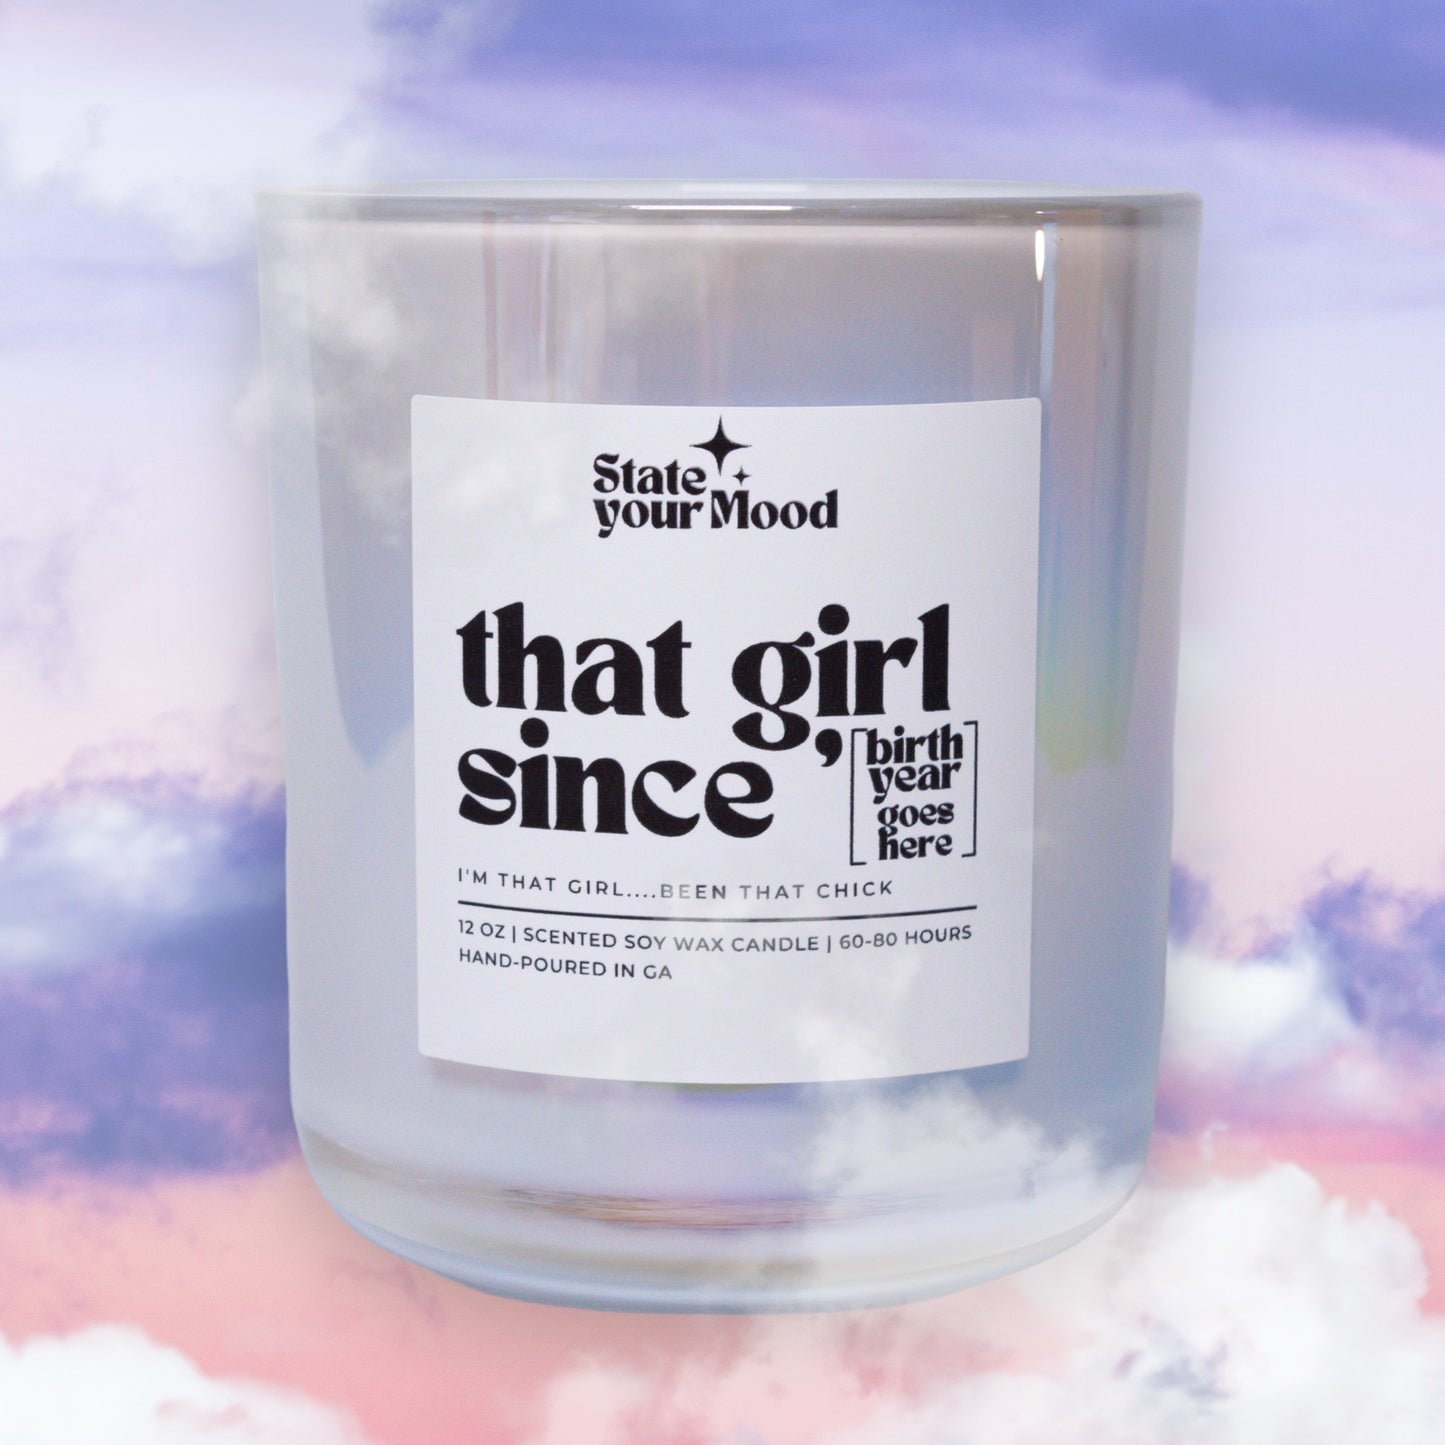 New Look! That Girl 365 (Customized) Candle